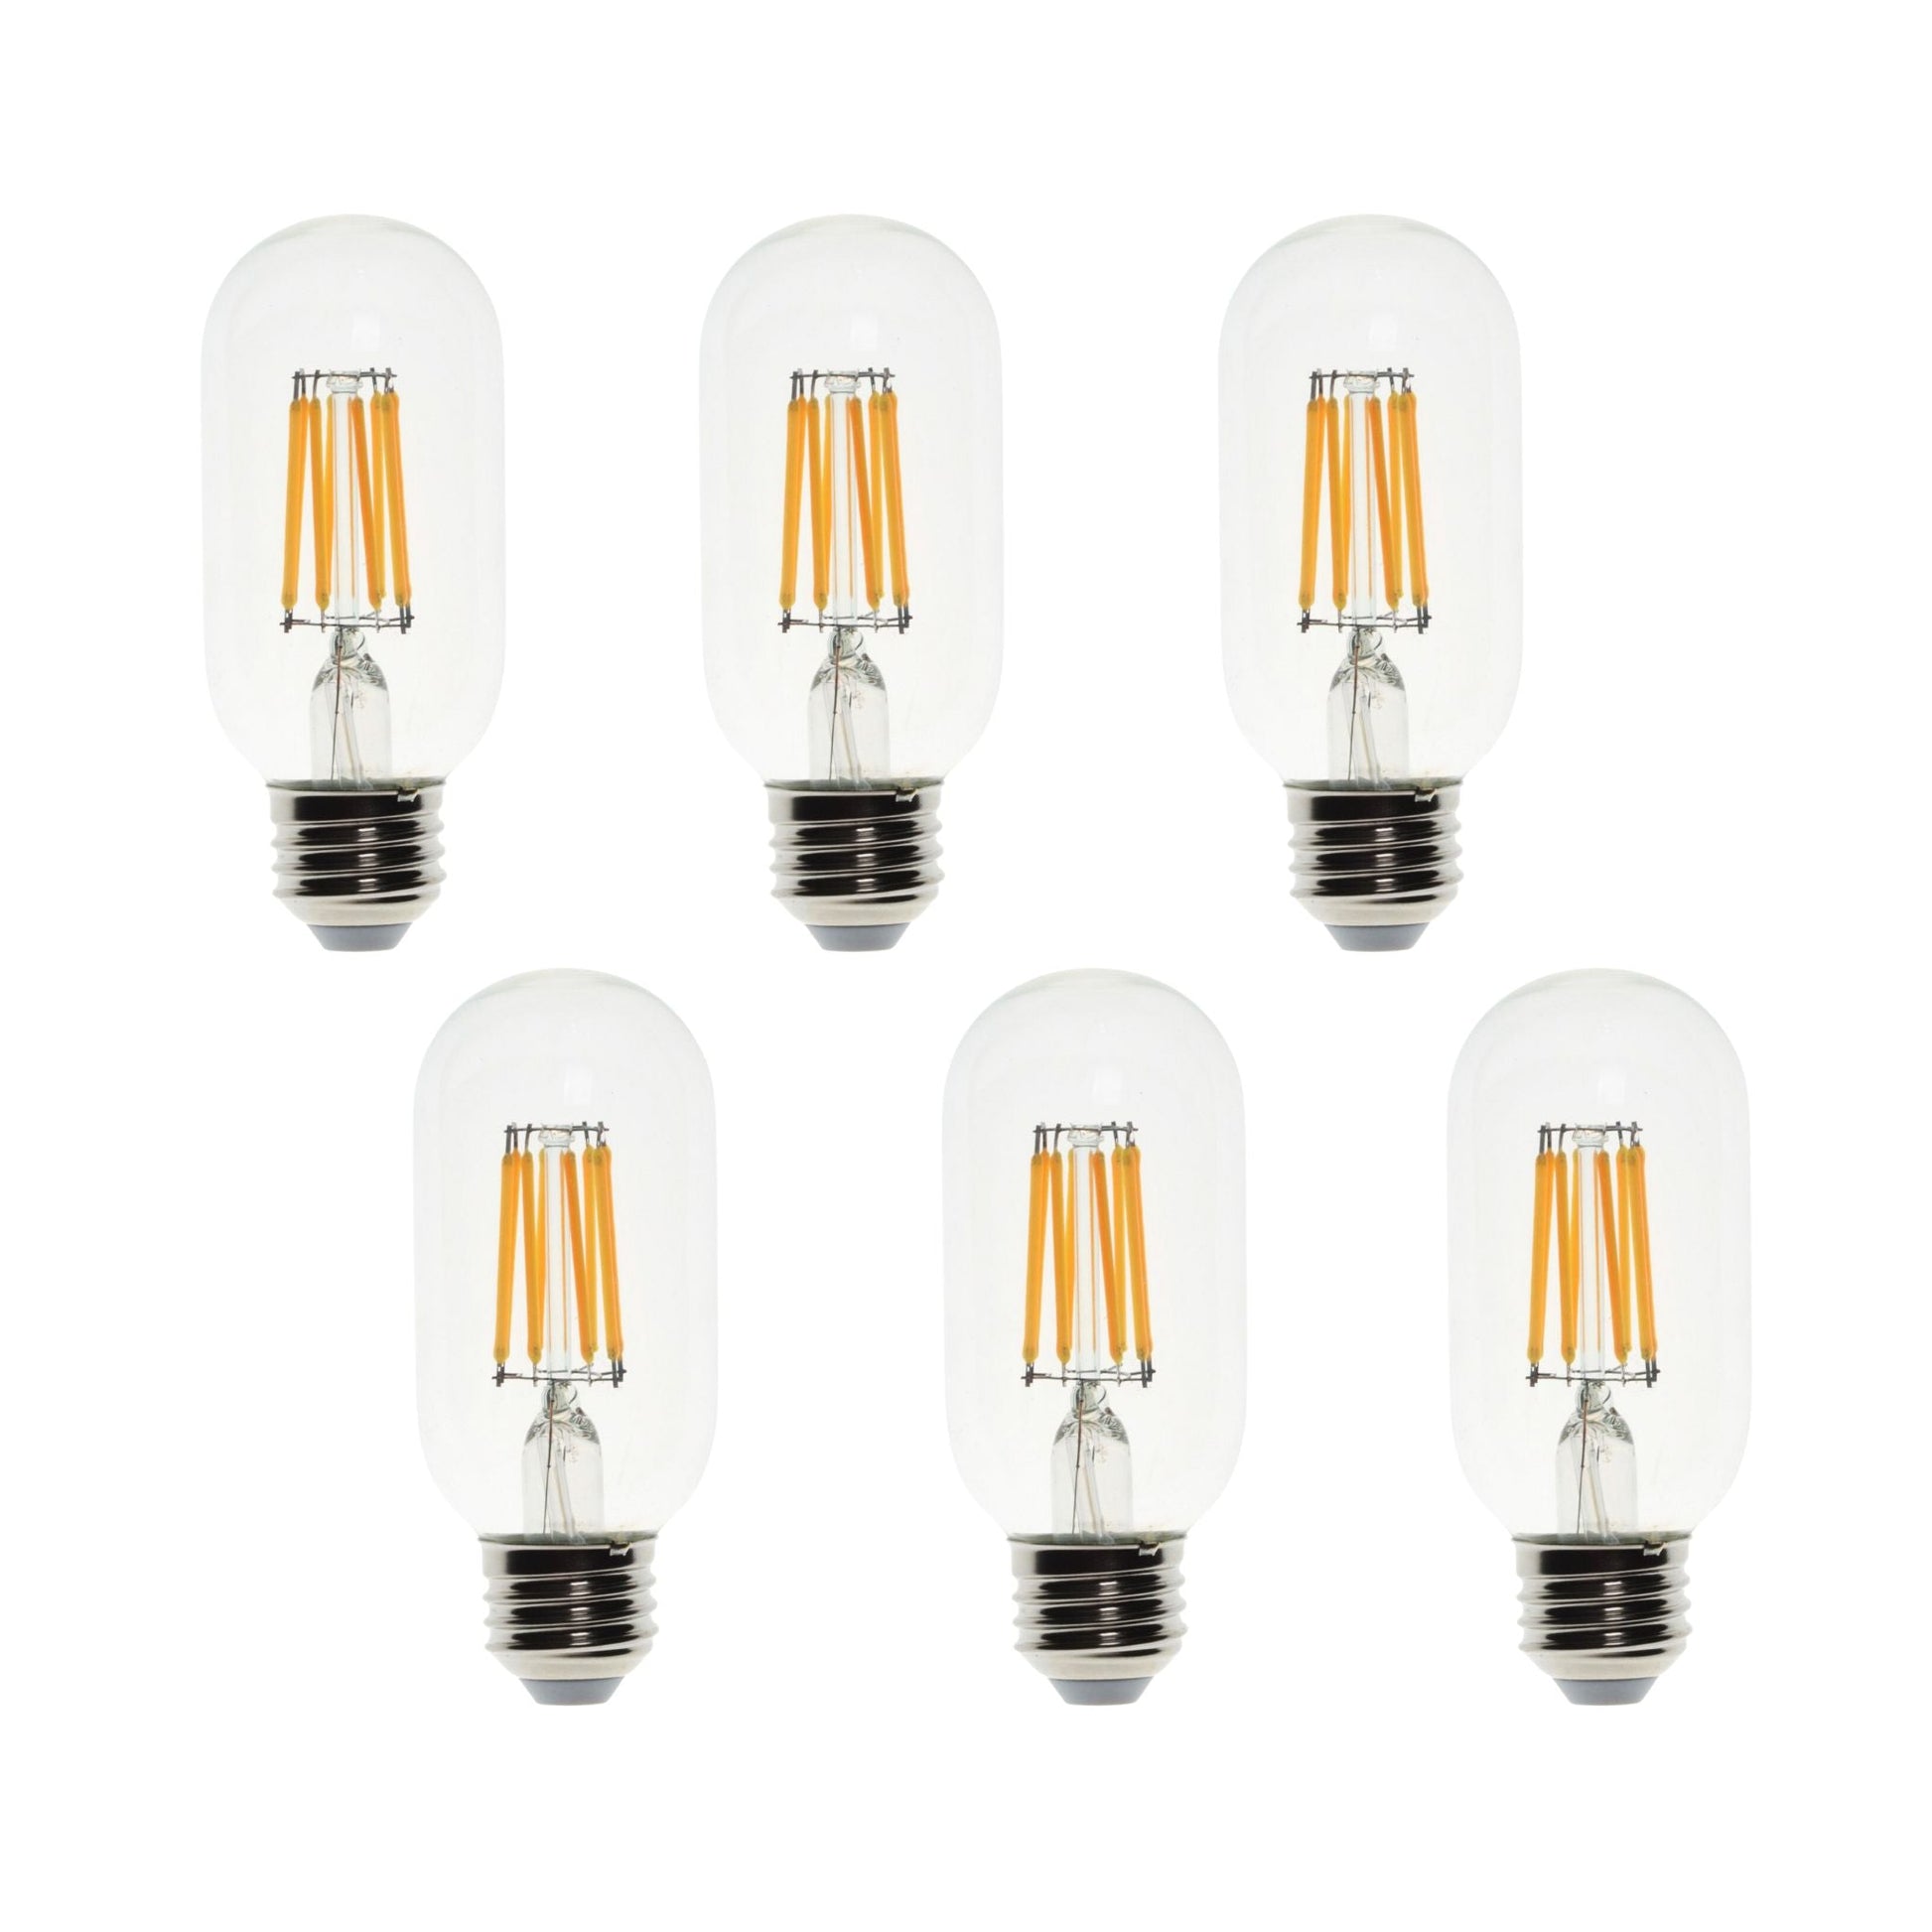 8 Watt Dimmable Filament Bulb - 2700k-Lightbulb-Bicycle Glass Co - Hardware-6 Bulb Pack-Bicycle Glass Co